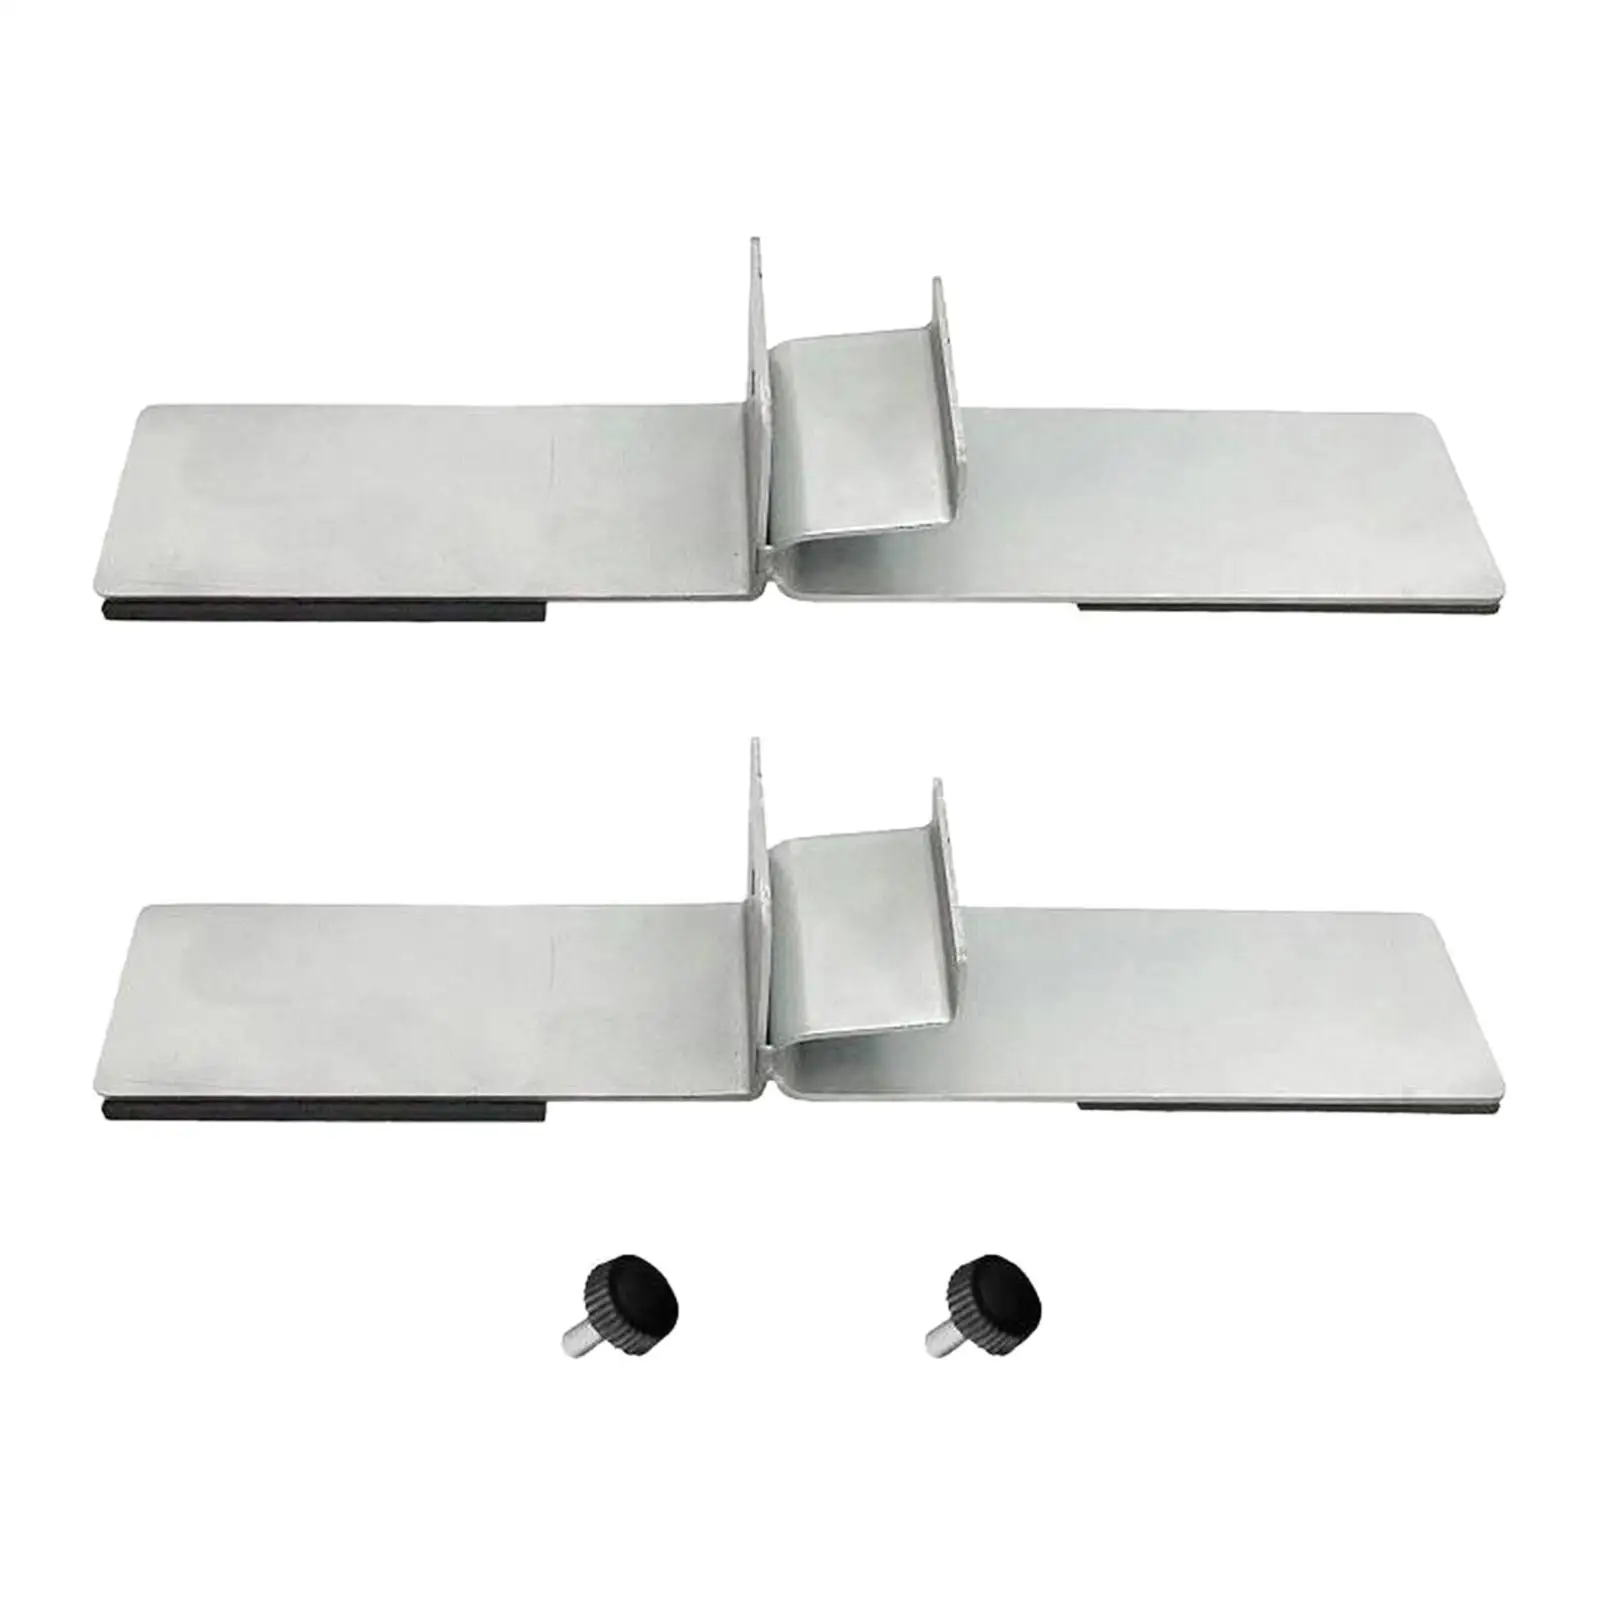 Infrared Heating Panel Stand Feet Household Accessory Universal Bracket Easy Install Feet Suitable Durable 2 Pieces for home